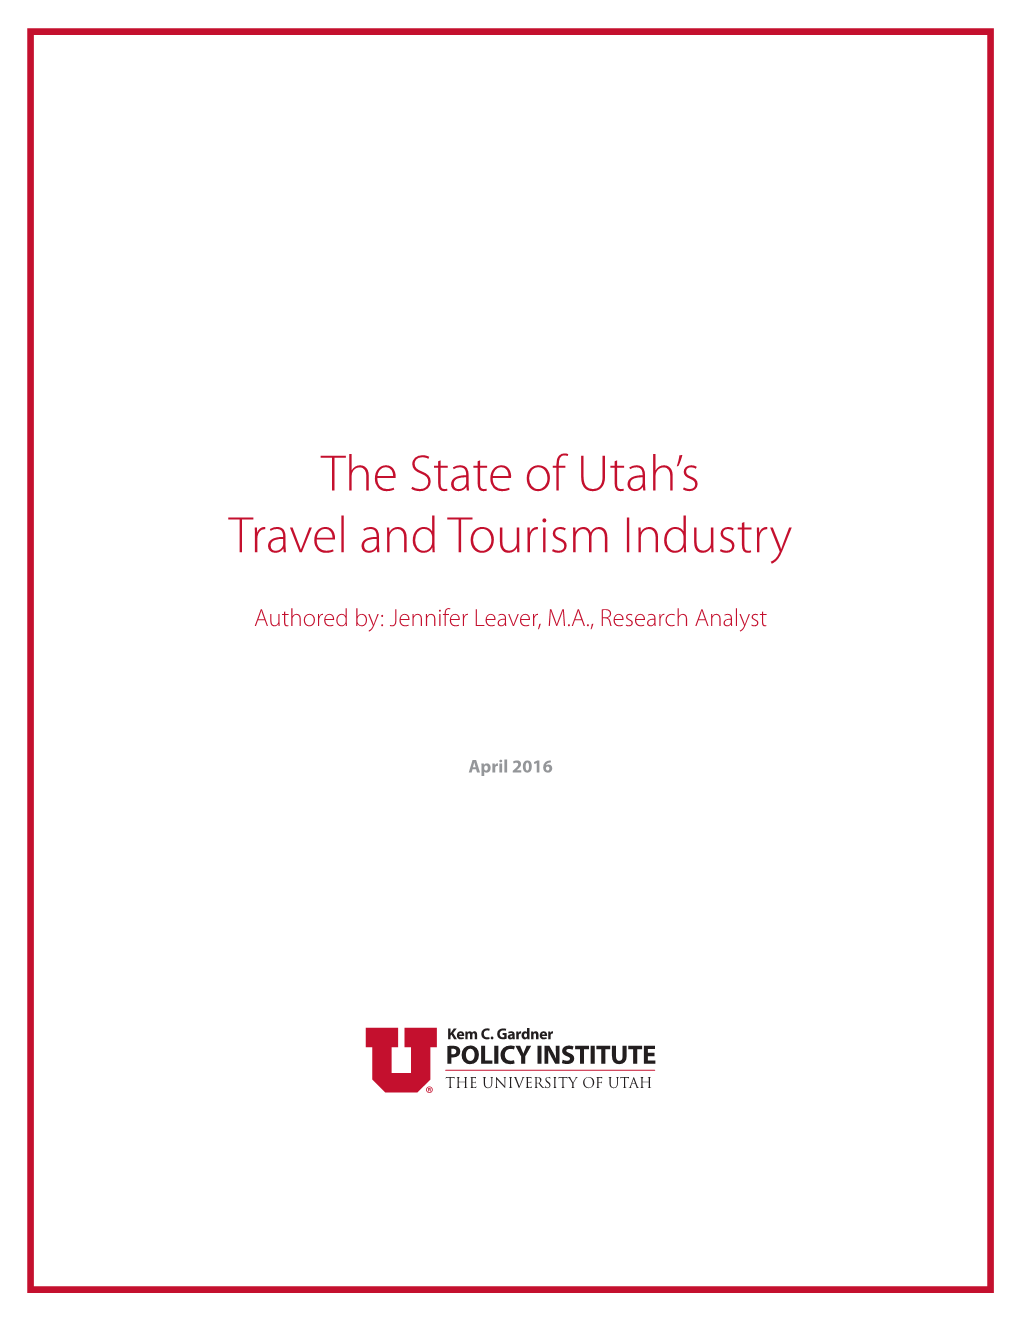 The State of Utah's Travel and Tourism Industry